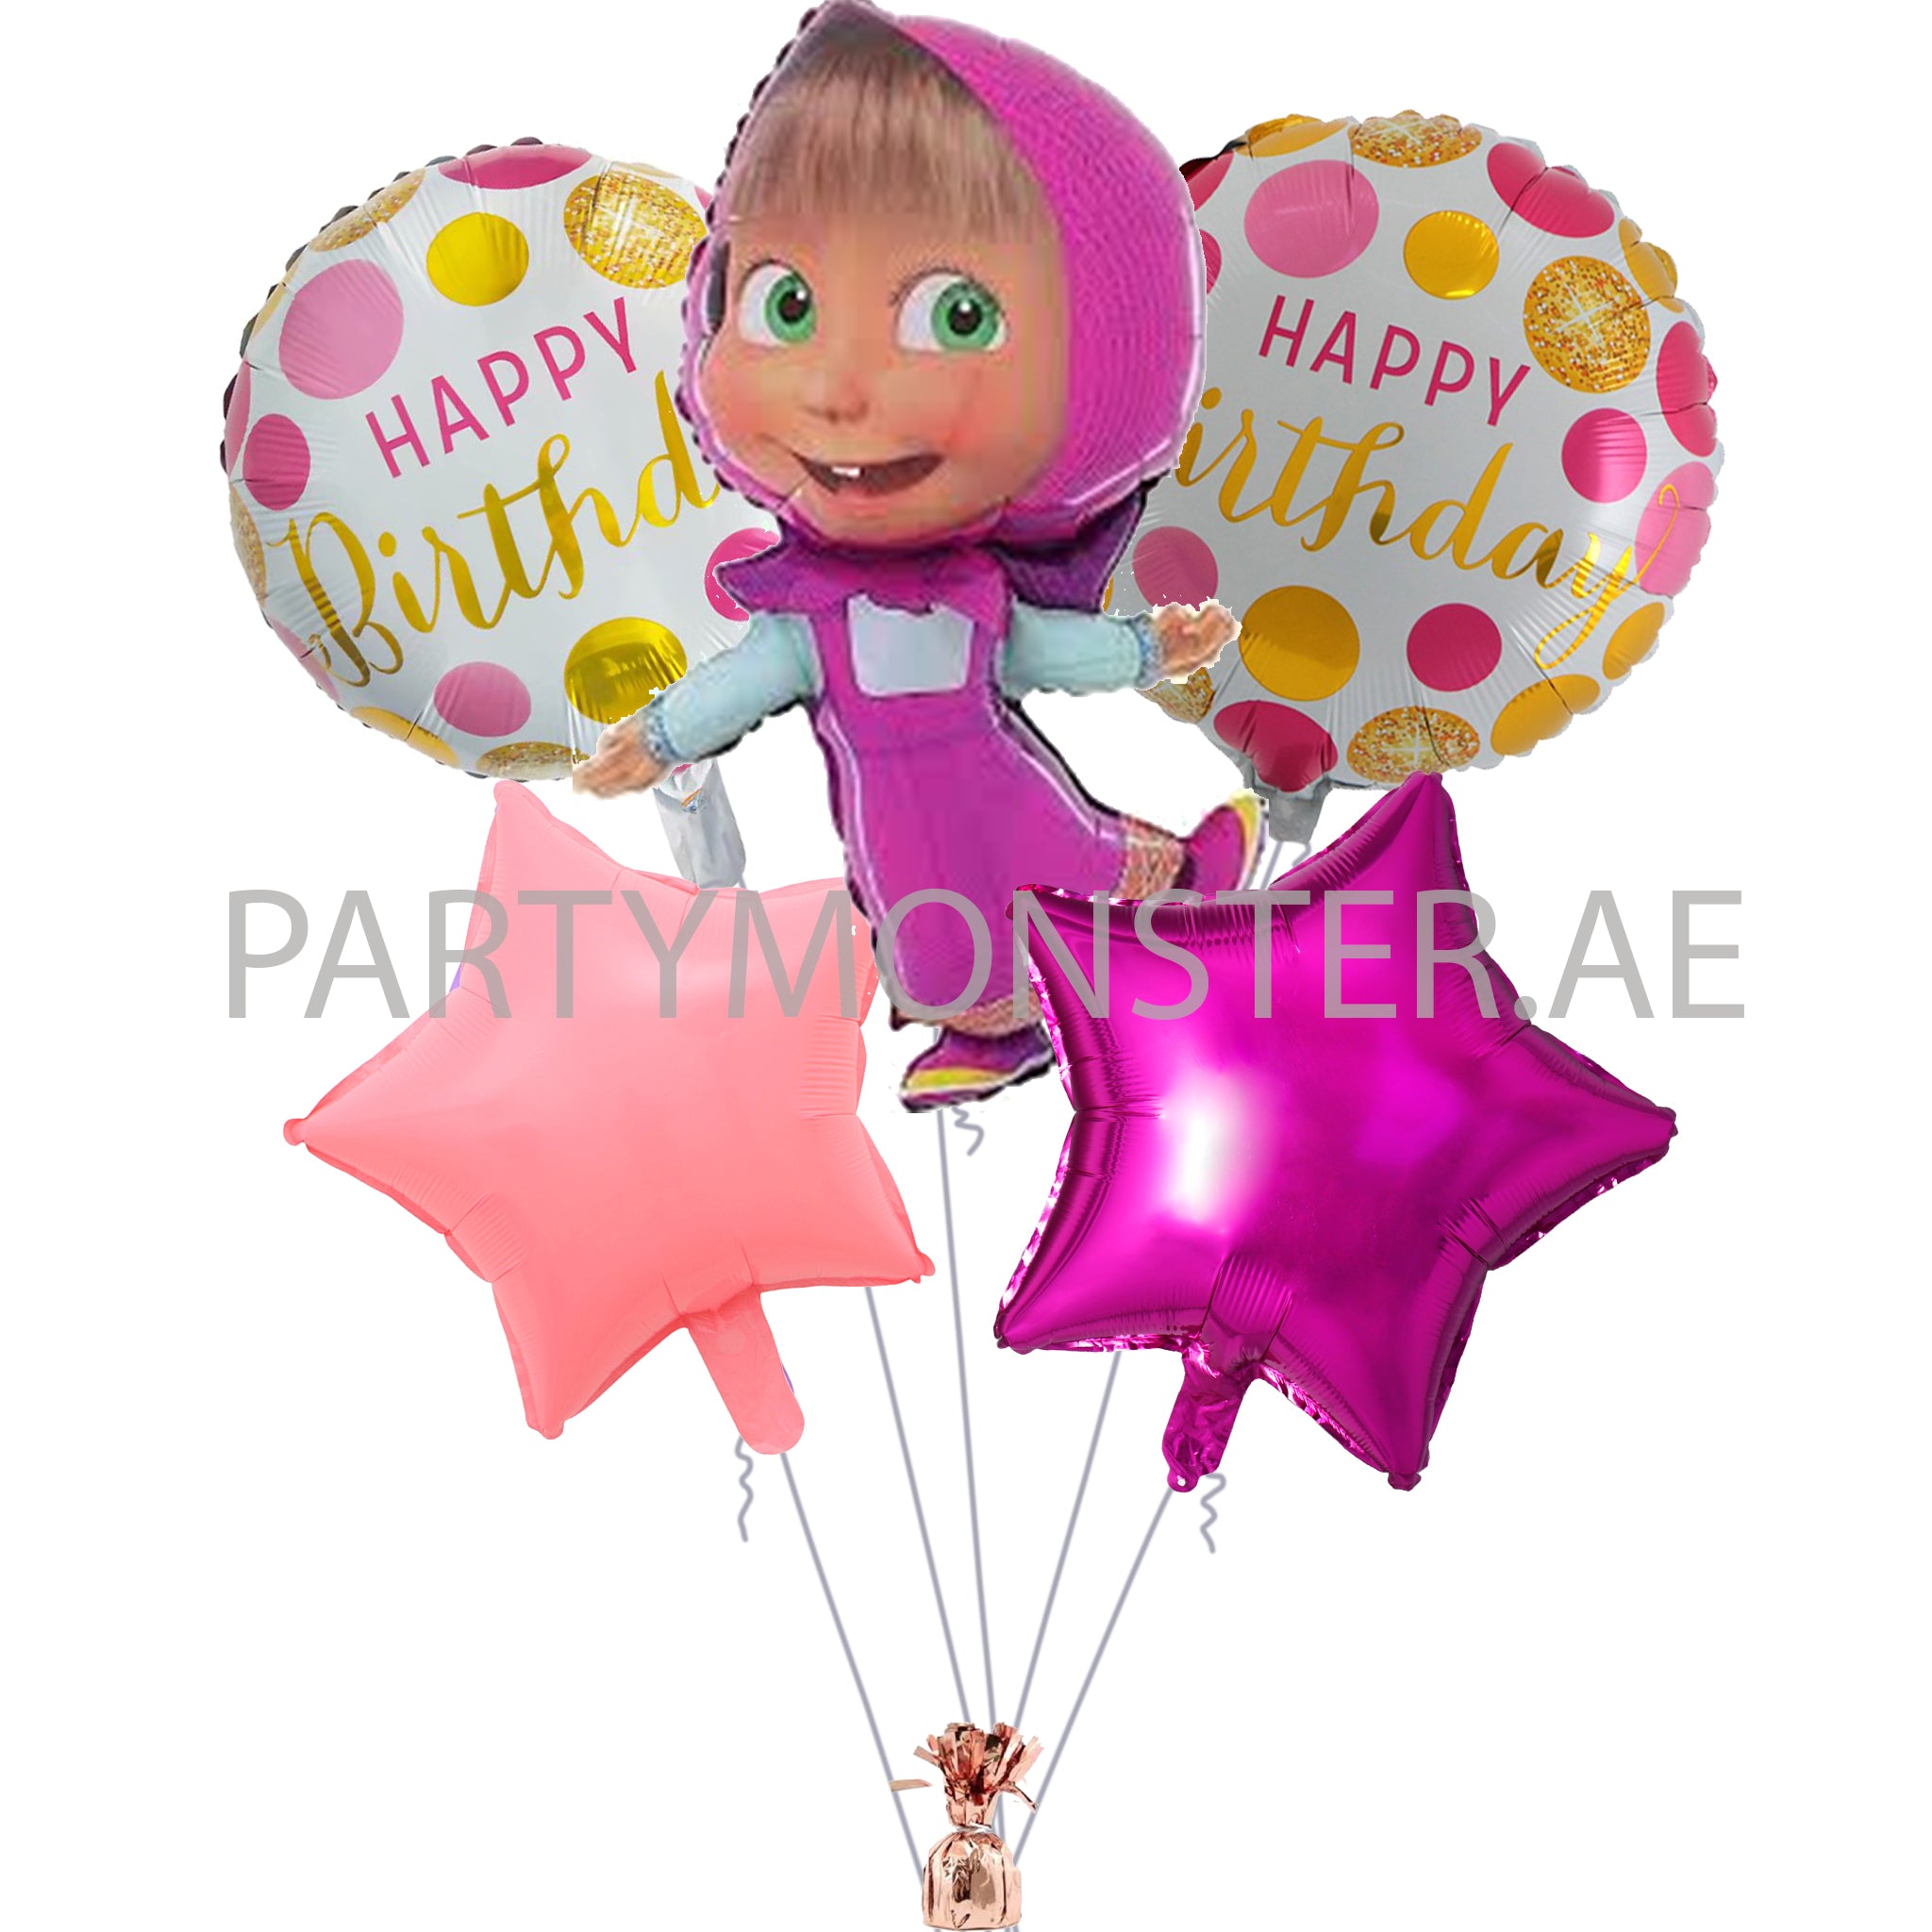 Masha and the Bear birthday balloons bouquet - PartyMonster.ae